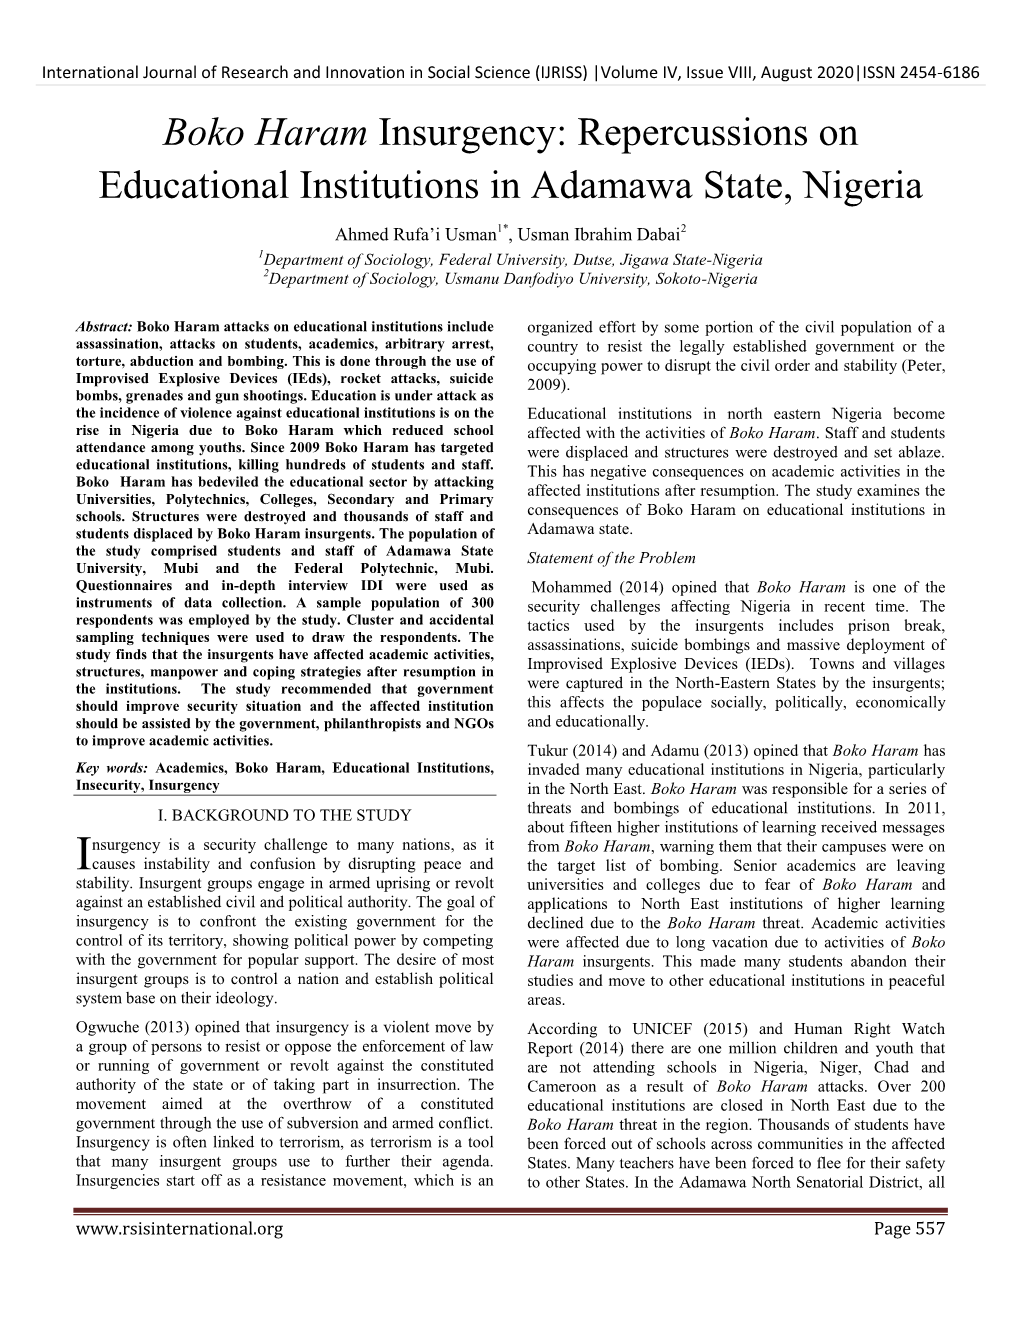 Boko Haram Insurgency: Repercussions on Educational Institutions in Adamawa State, Nigeria